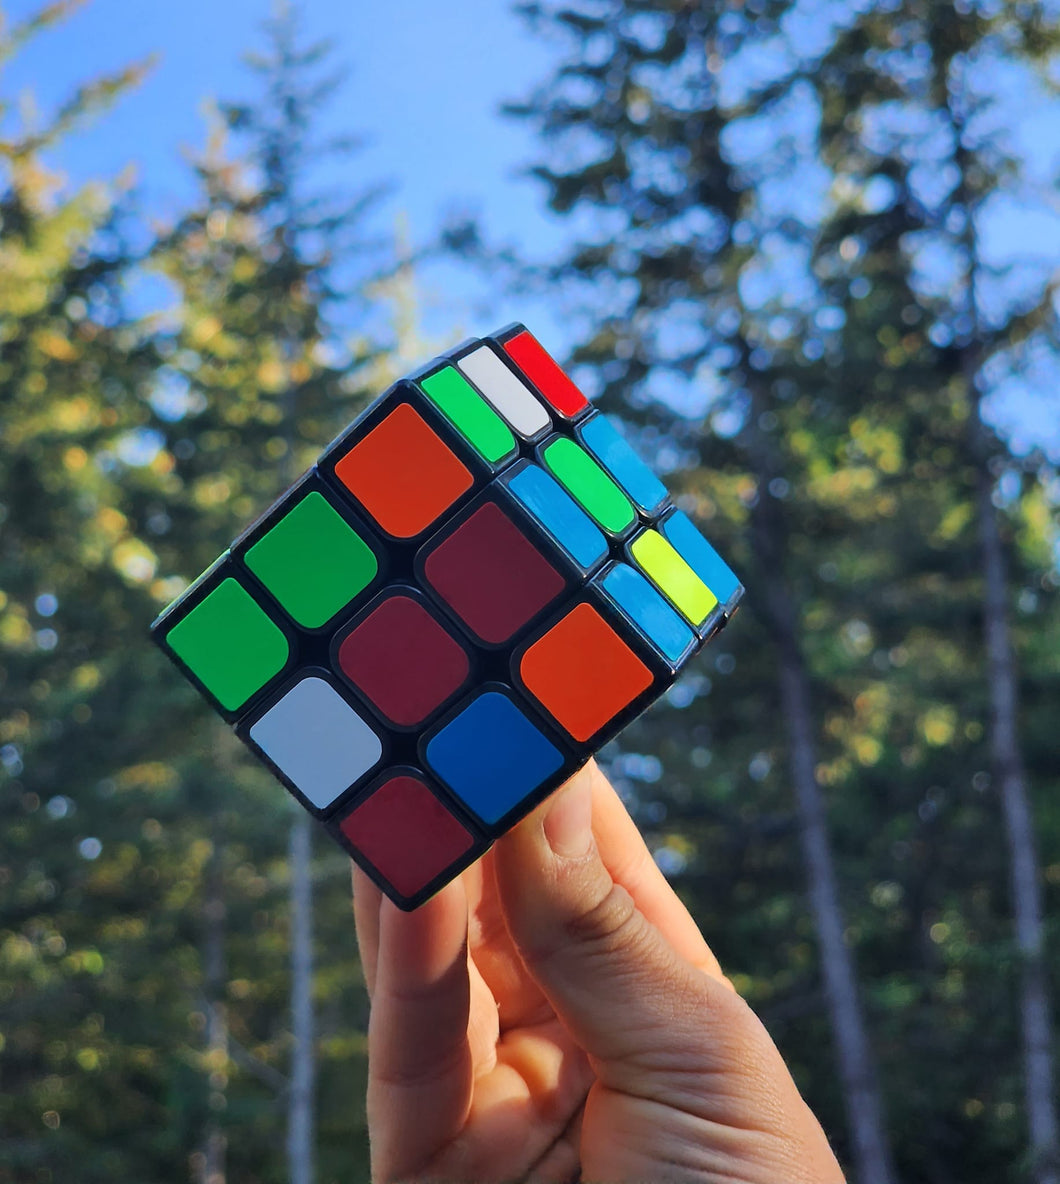 Puzzle Cube - In Stock